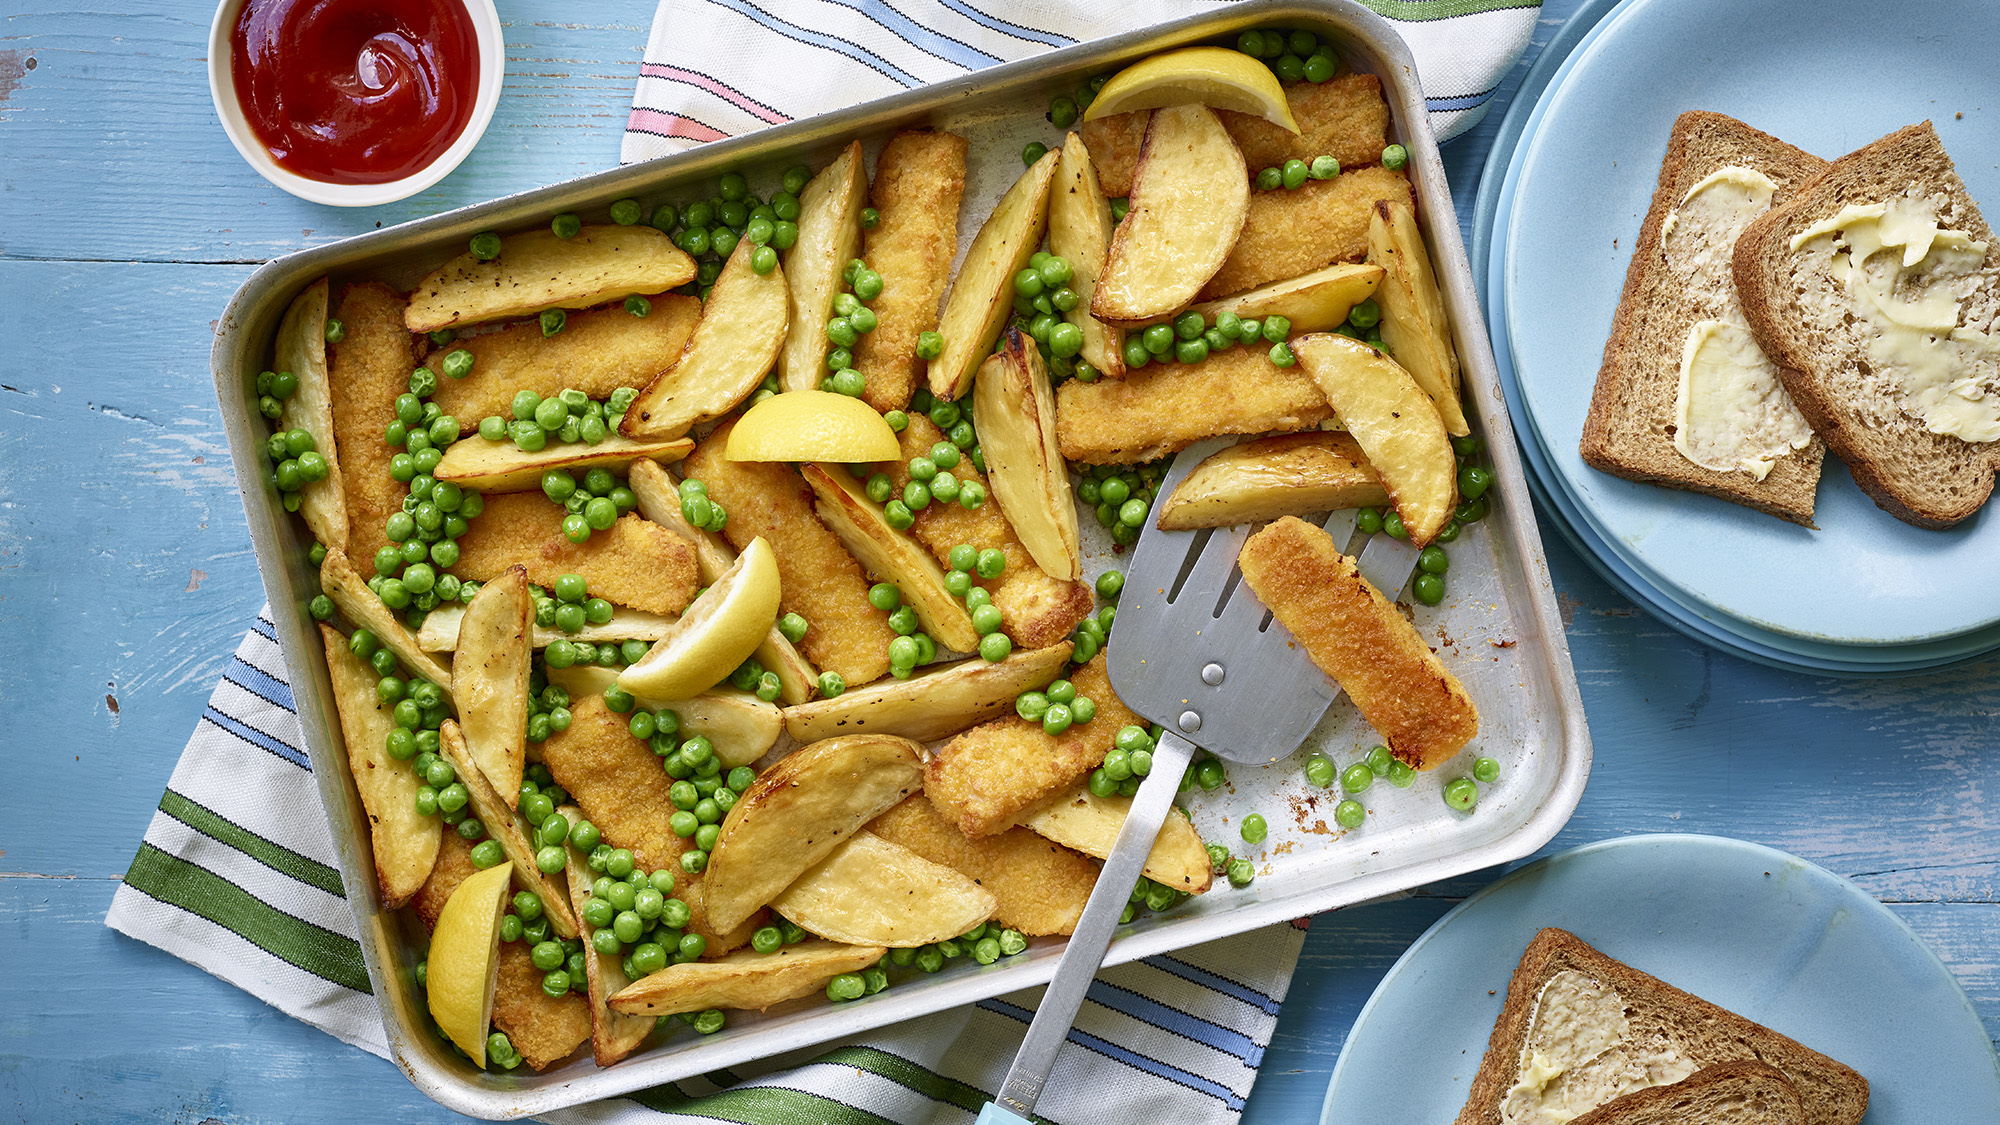 Triple-cooked chips recipe - BBC Food